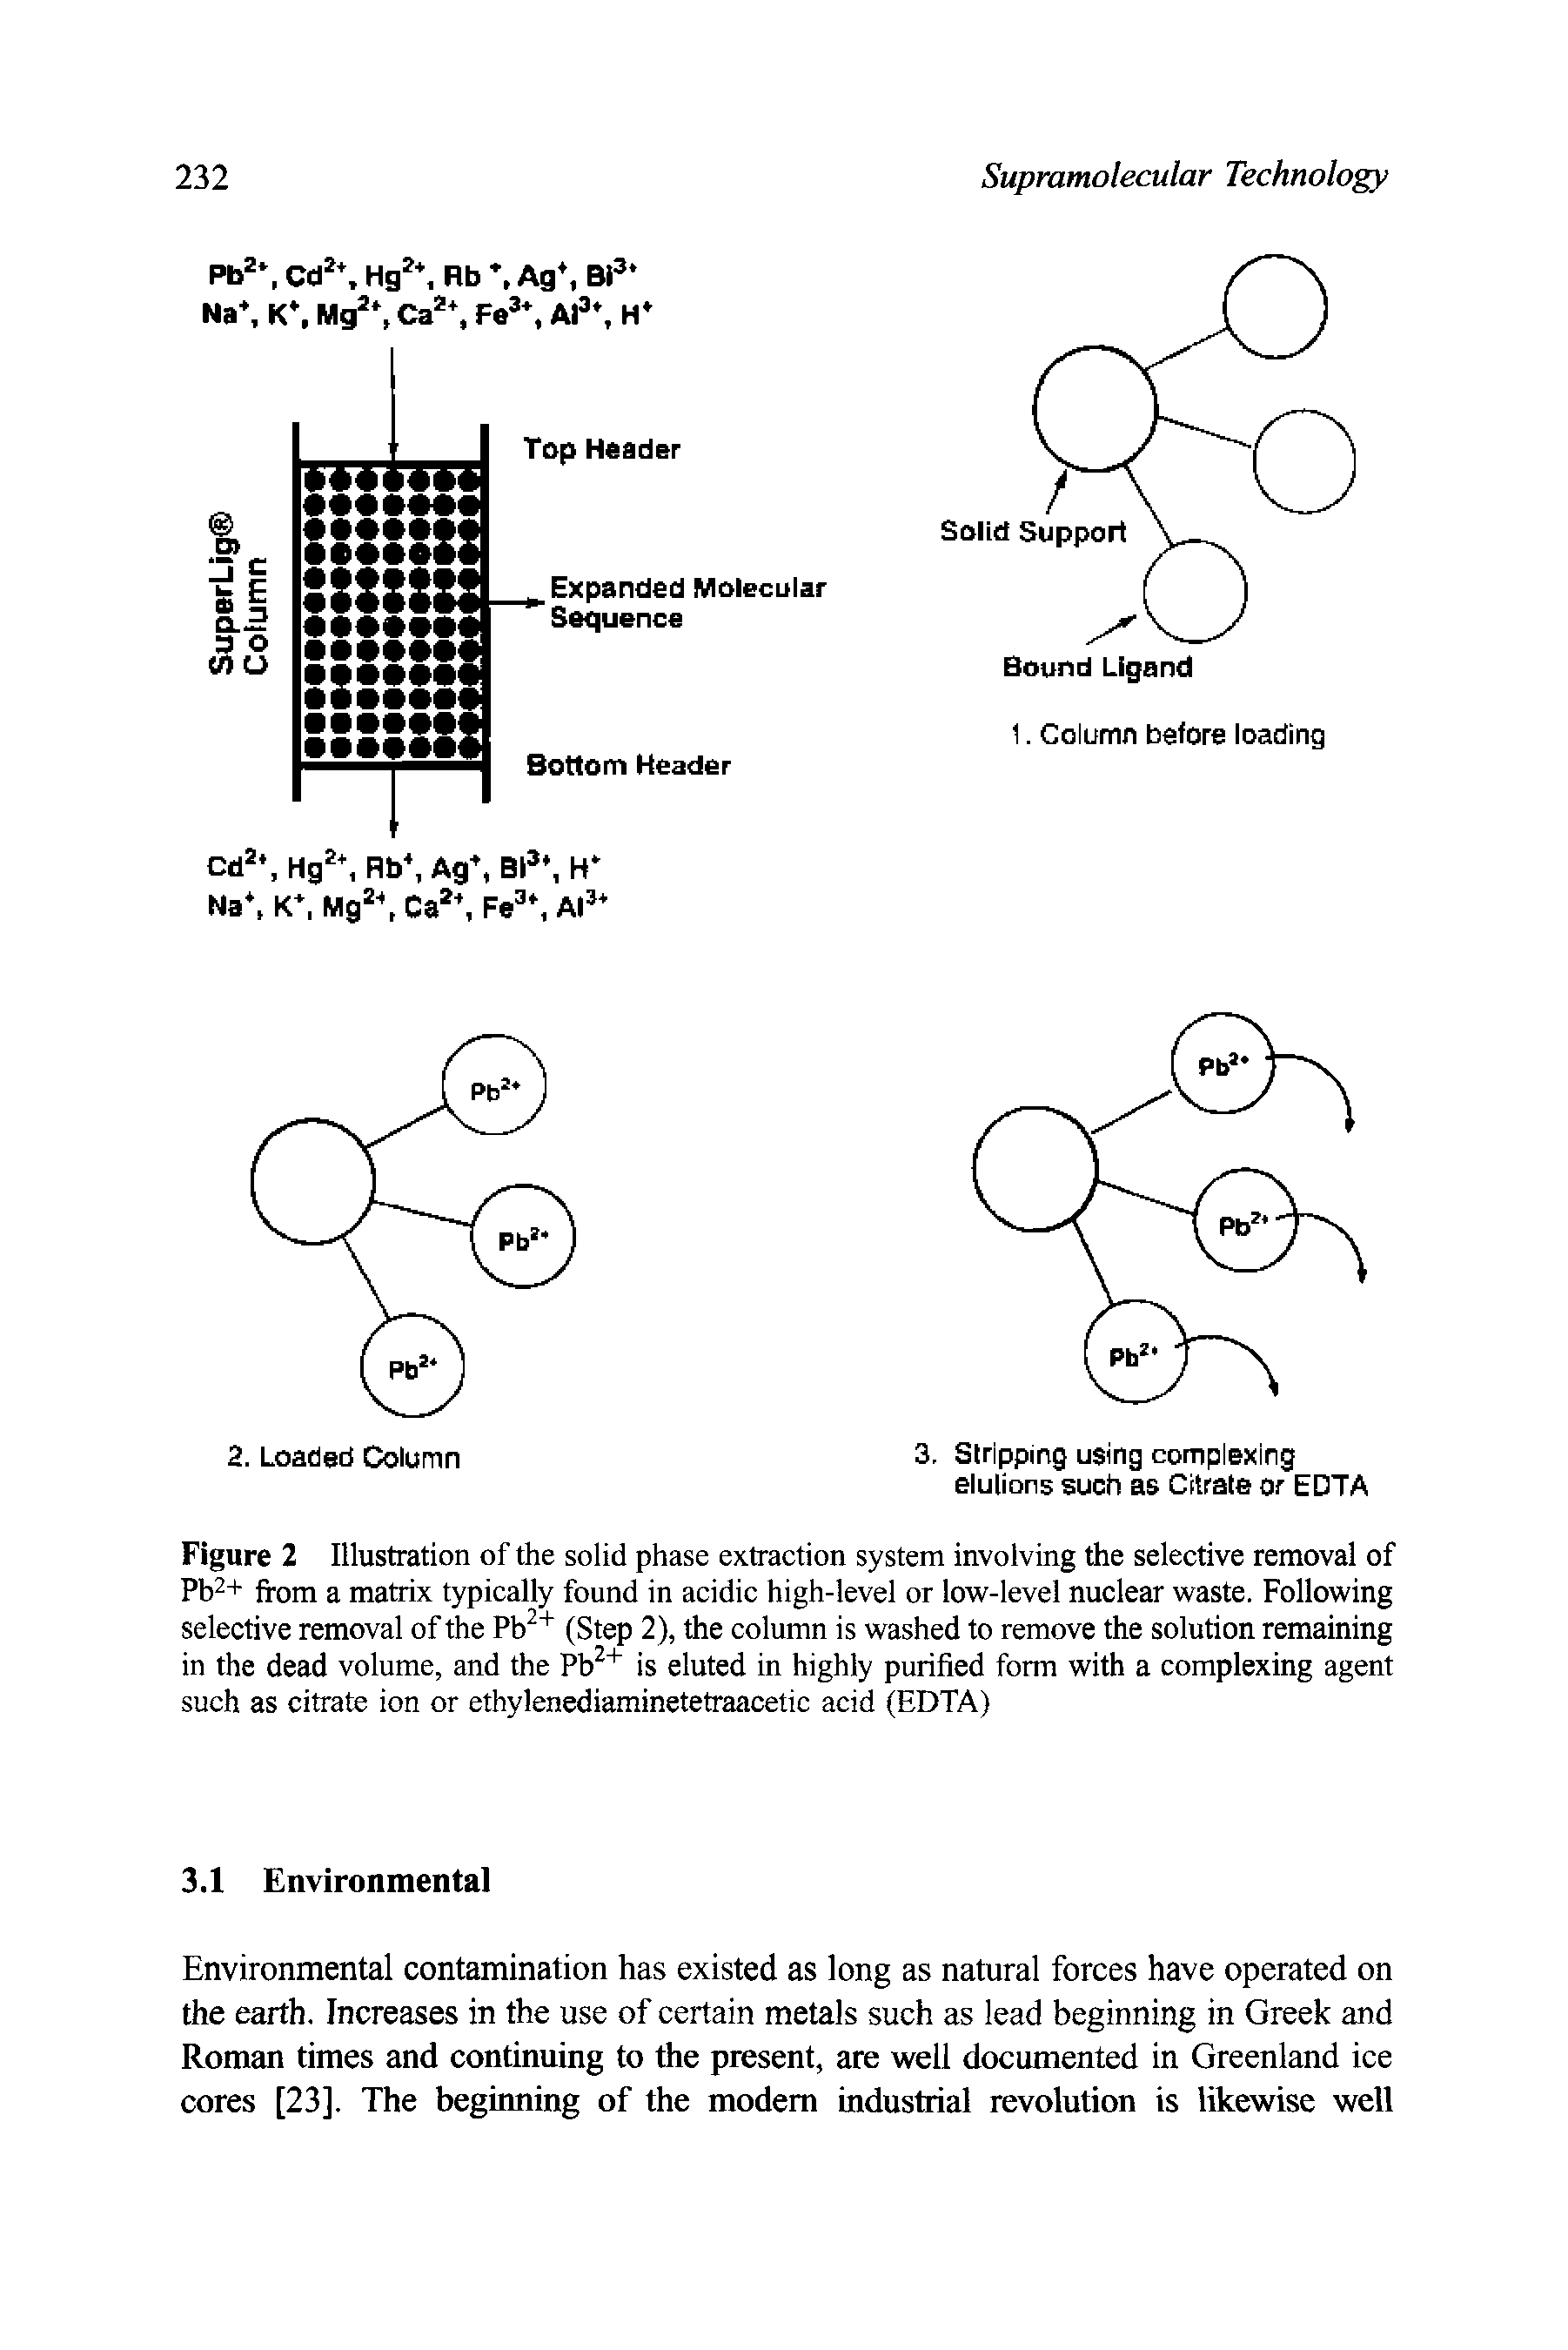 Figure 2 Illustration of the solid phase extraction system involving the selective removal of Pb2+ from a matrix typically found in acidic high-level or low-level nuclear waste. Following selective removal of the Pb (Step 2), the column is washed to remove the solution remaining in the dead volume, and the Pb is eluted in highly purified form with a complexing agent such as citrate ion or ethylenediaminetetraacetic acid (EDTA)...